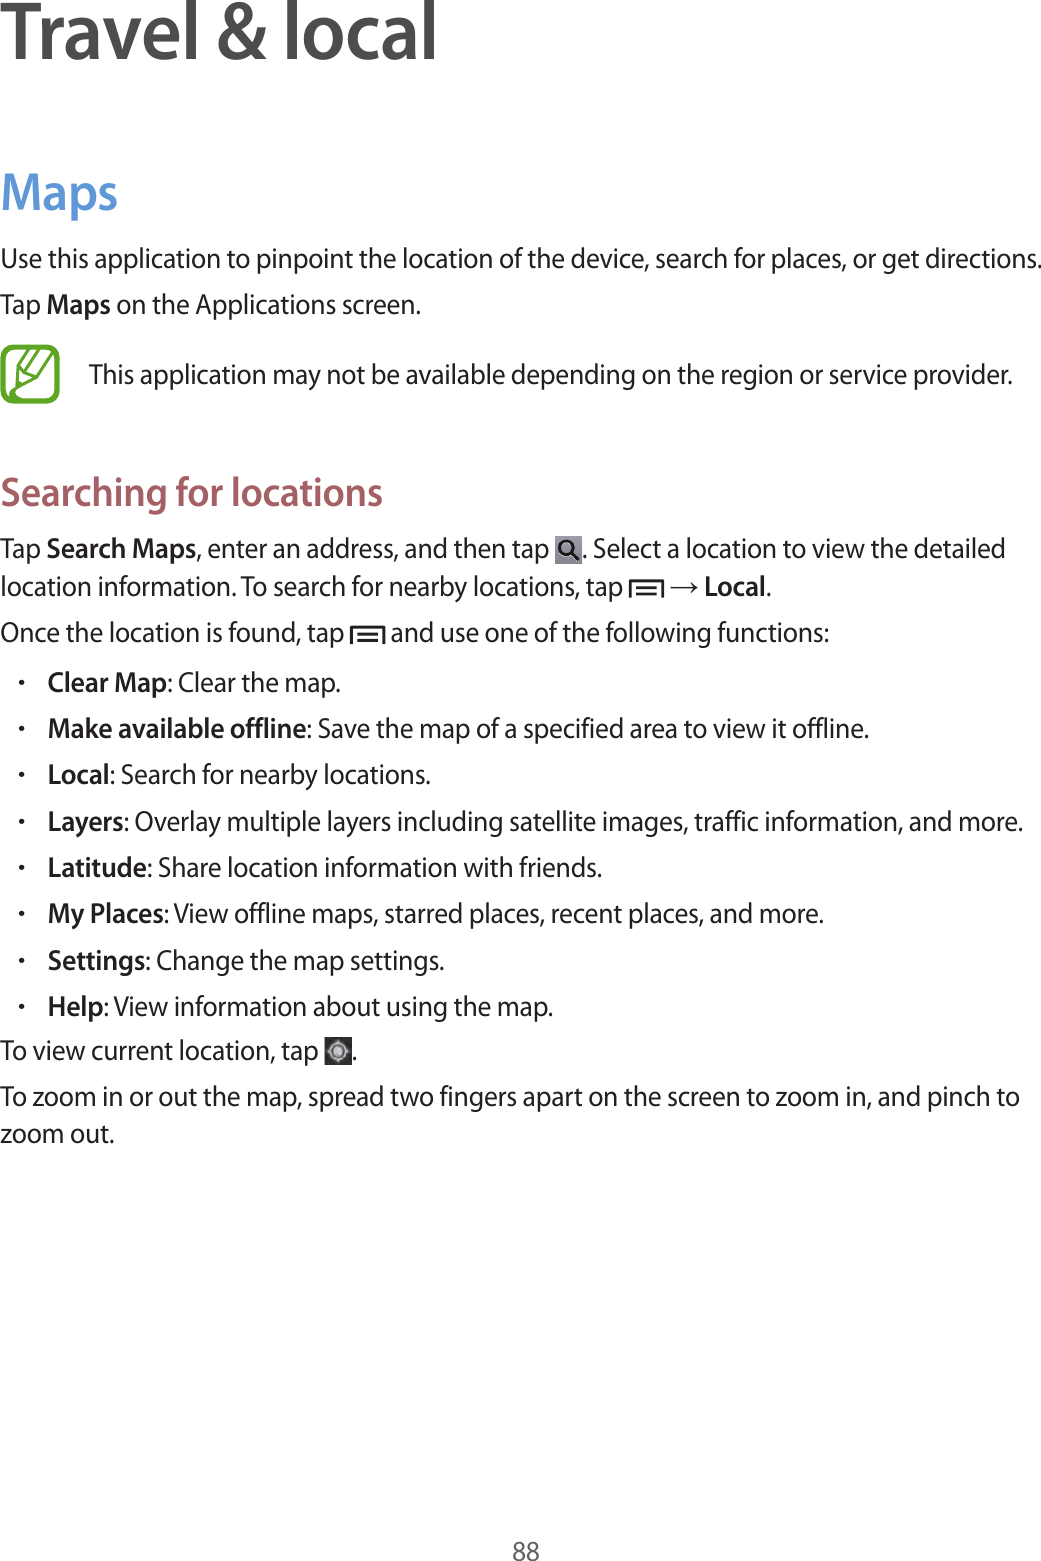 88Travel &amp; localMapsUse this application to pinpoint the location of the device, search for places, or get directions.Tap Maps on the Applications screen.This application may not be available depending on the region or service provider.Searching for locationsTap Search Maps, enter an address, and then tap  . Select a location to view the detailed location information. To search for nearby locations, tap   → Local.Once the location is found, tap   and use one of the following functions:•Clear Map: Clear the map.•Make available offline: Save the map of a specified area to view it offline.•Local: Search for nearby locations.•Layers: Overlay multiple layers including satellite images, traffic information, and more.•Latitude: Share location information with friends.•My Places: View offline maps, starred places, recent places, and more.•Settings: Change the map settings.•Help: View information about using the map.To view current location, tap  .To zoom in or out the map, spread two fingers apart on the screen to zoom in, and pinch to zoom out.